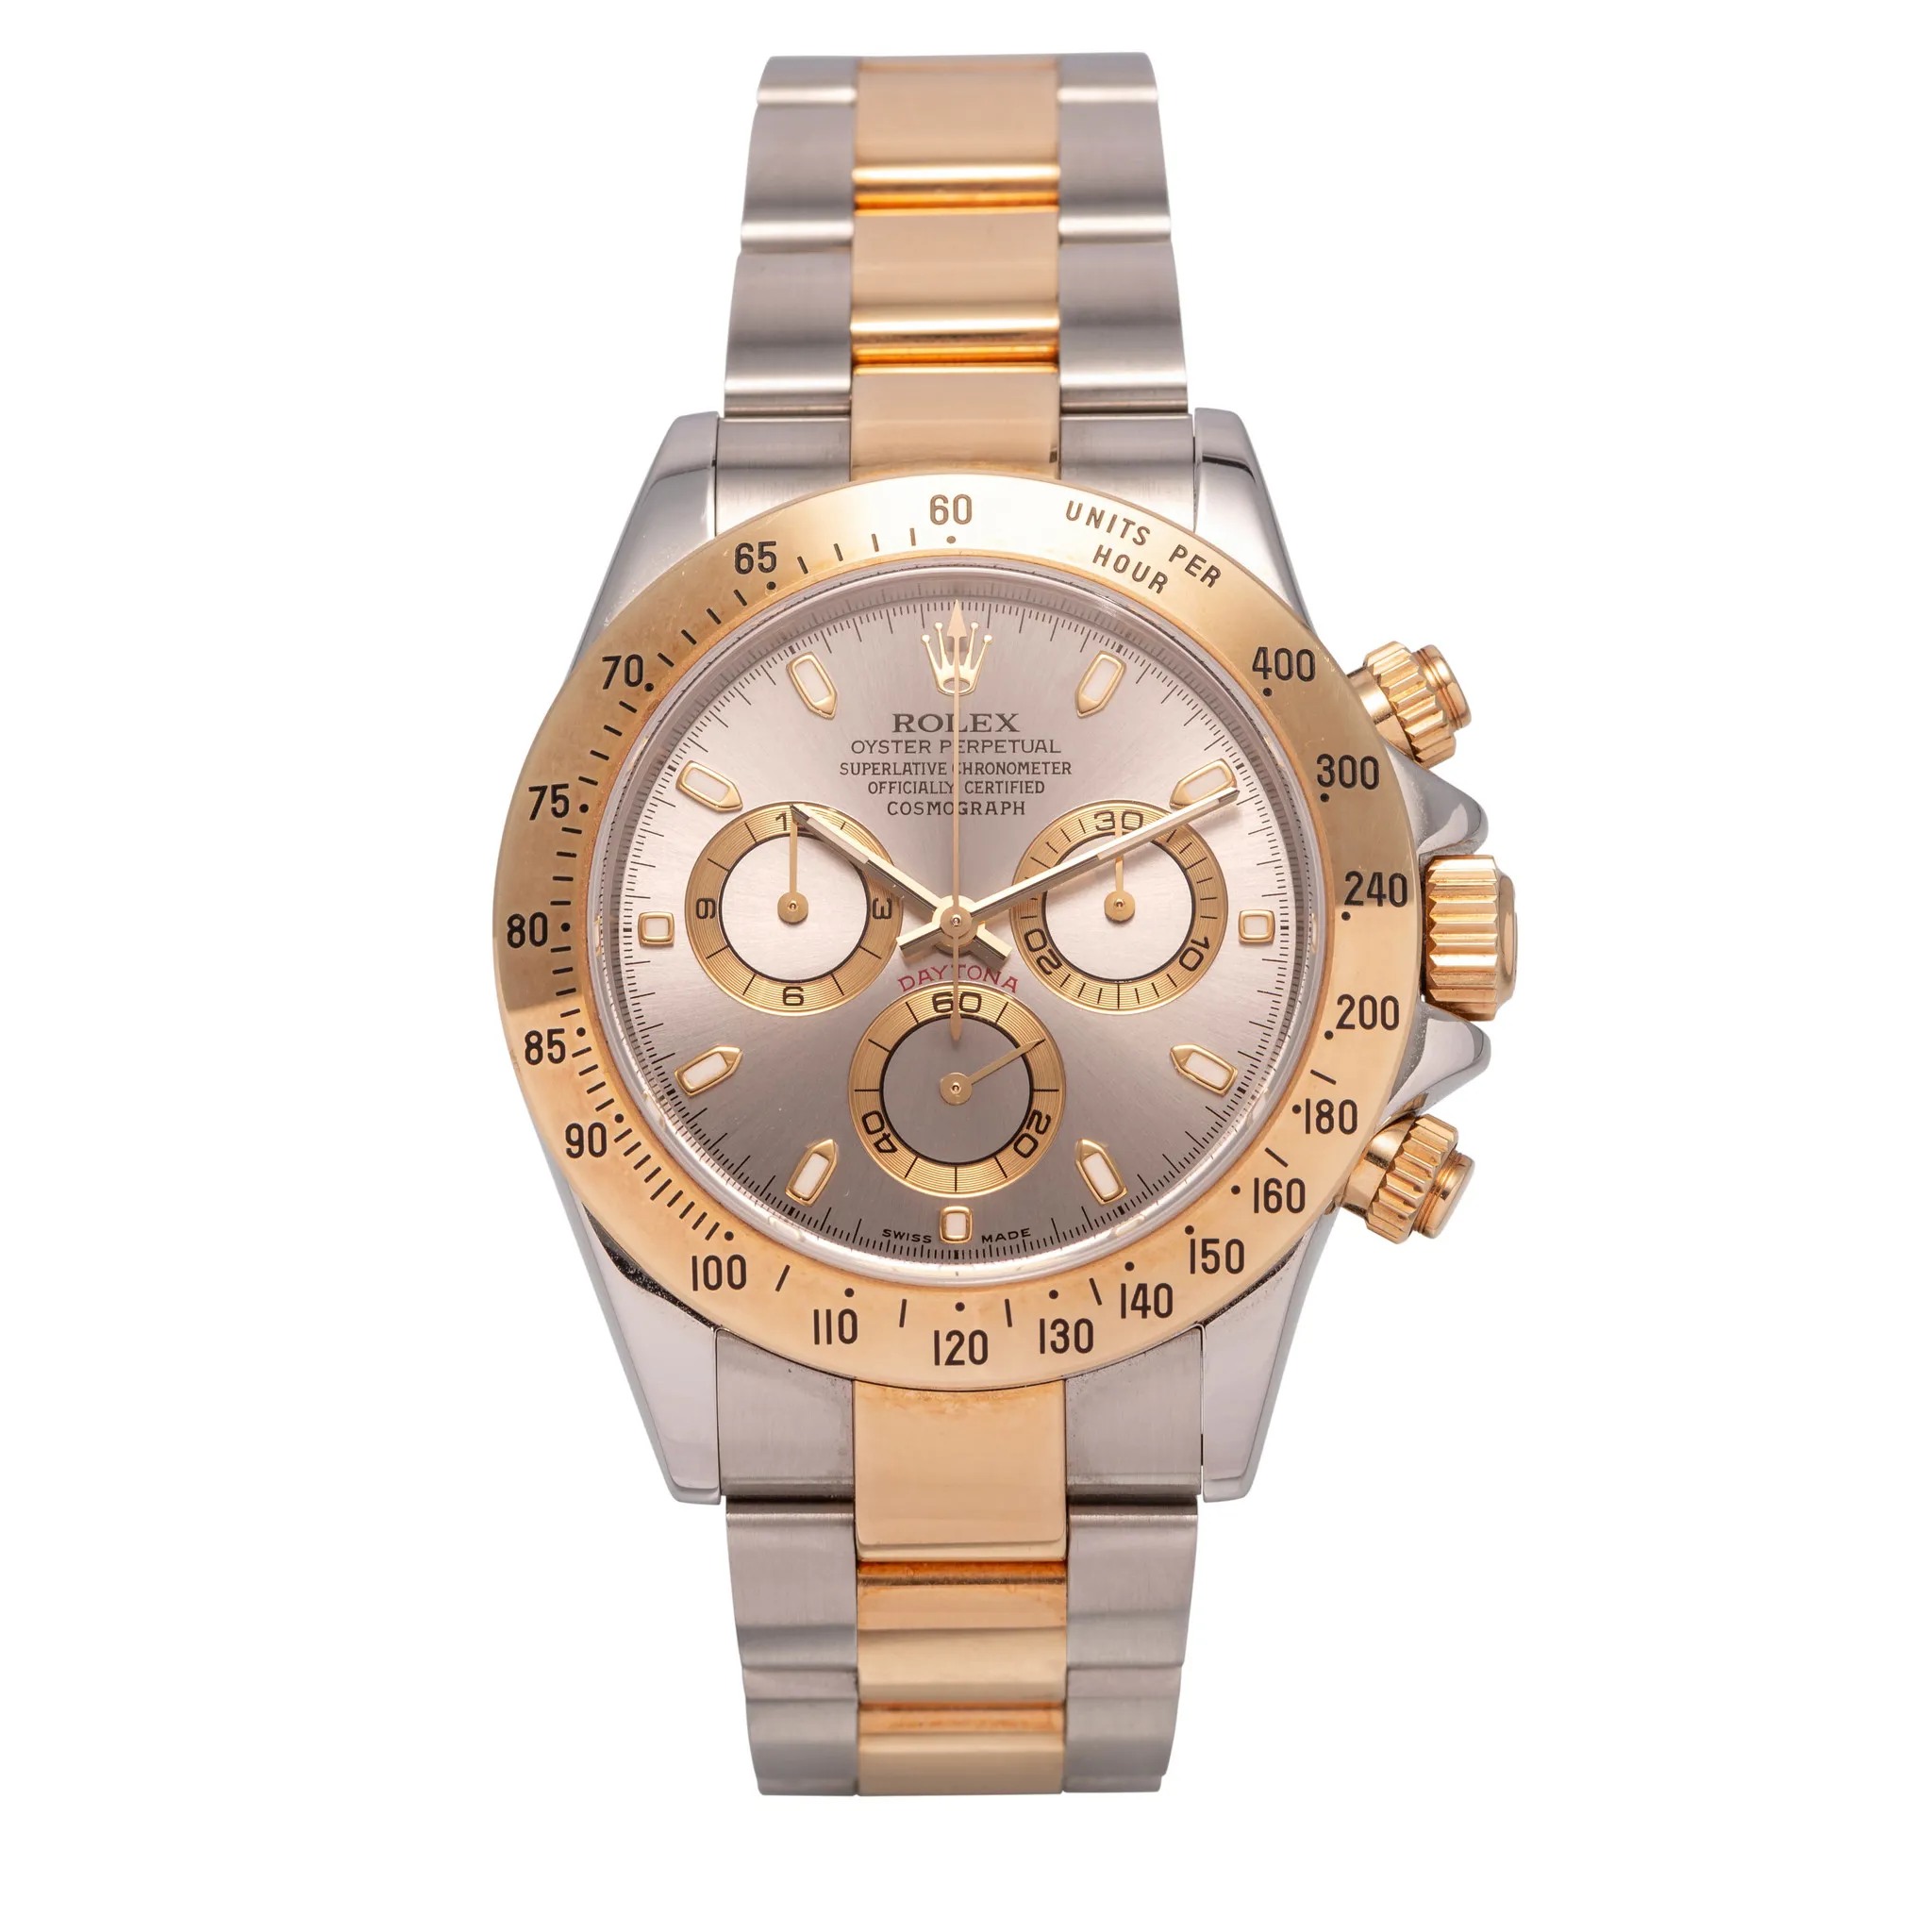 Rolex Daytona 116523 39mm Yellow gold and stainless steel Silver